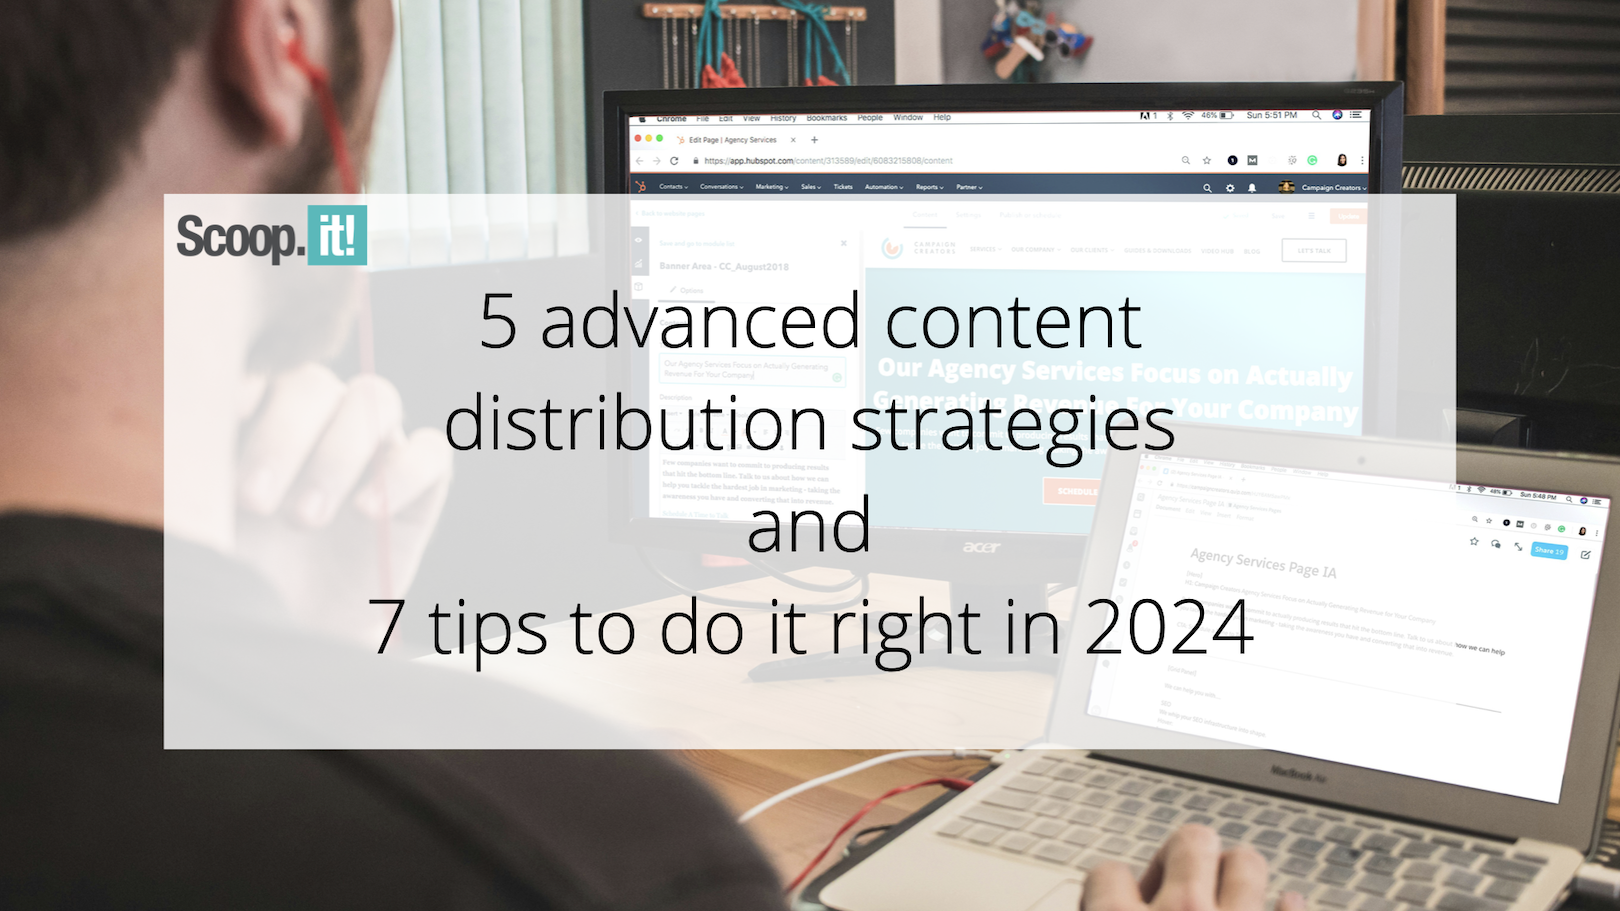 5-advanced-content-distribution-strategies-and-7-tips-to-do-it-right-in-2024-–-scoop.it-blog